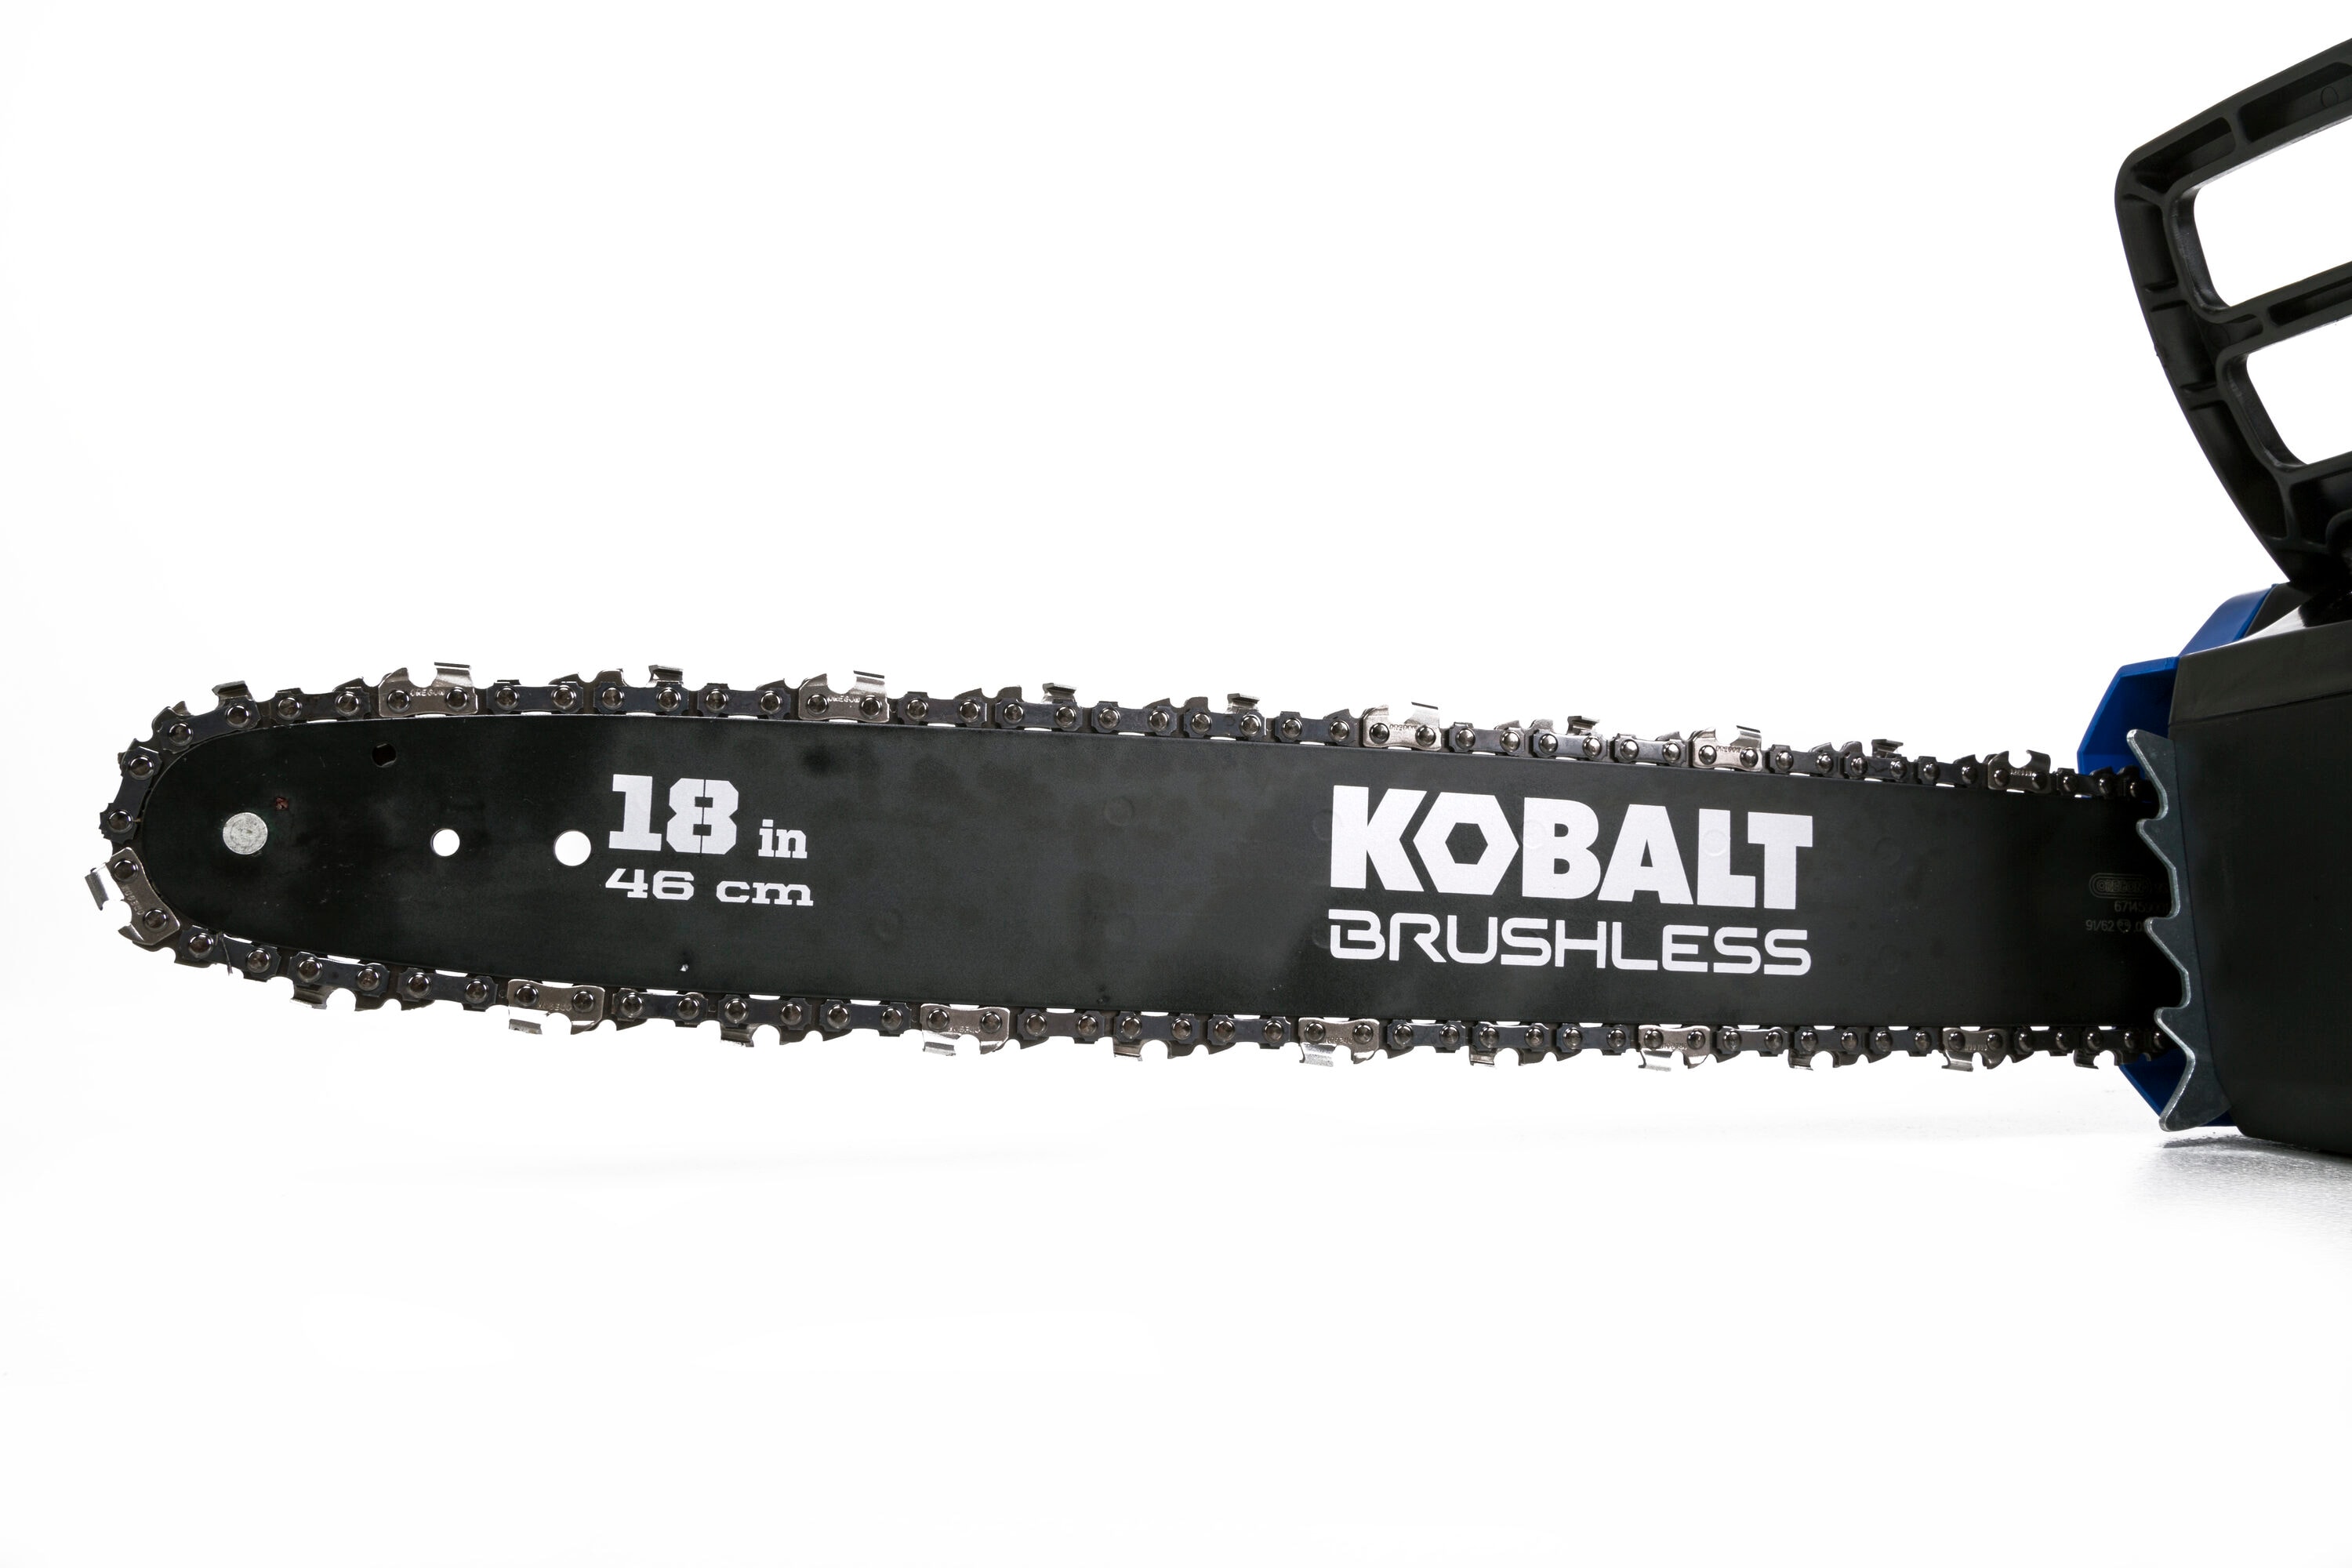 Kobalt A011038 18-in Corded Electric 15 Amp Chainsaw